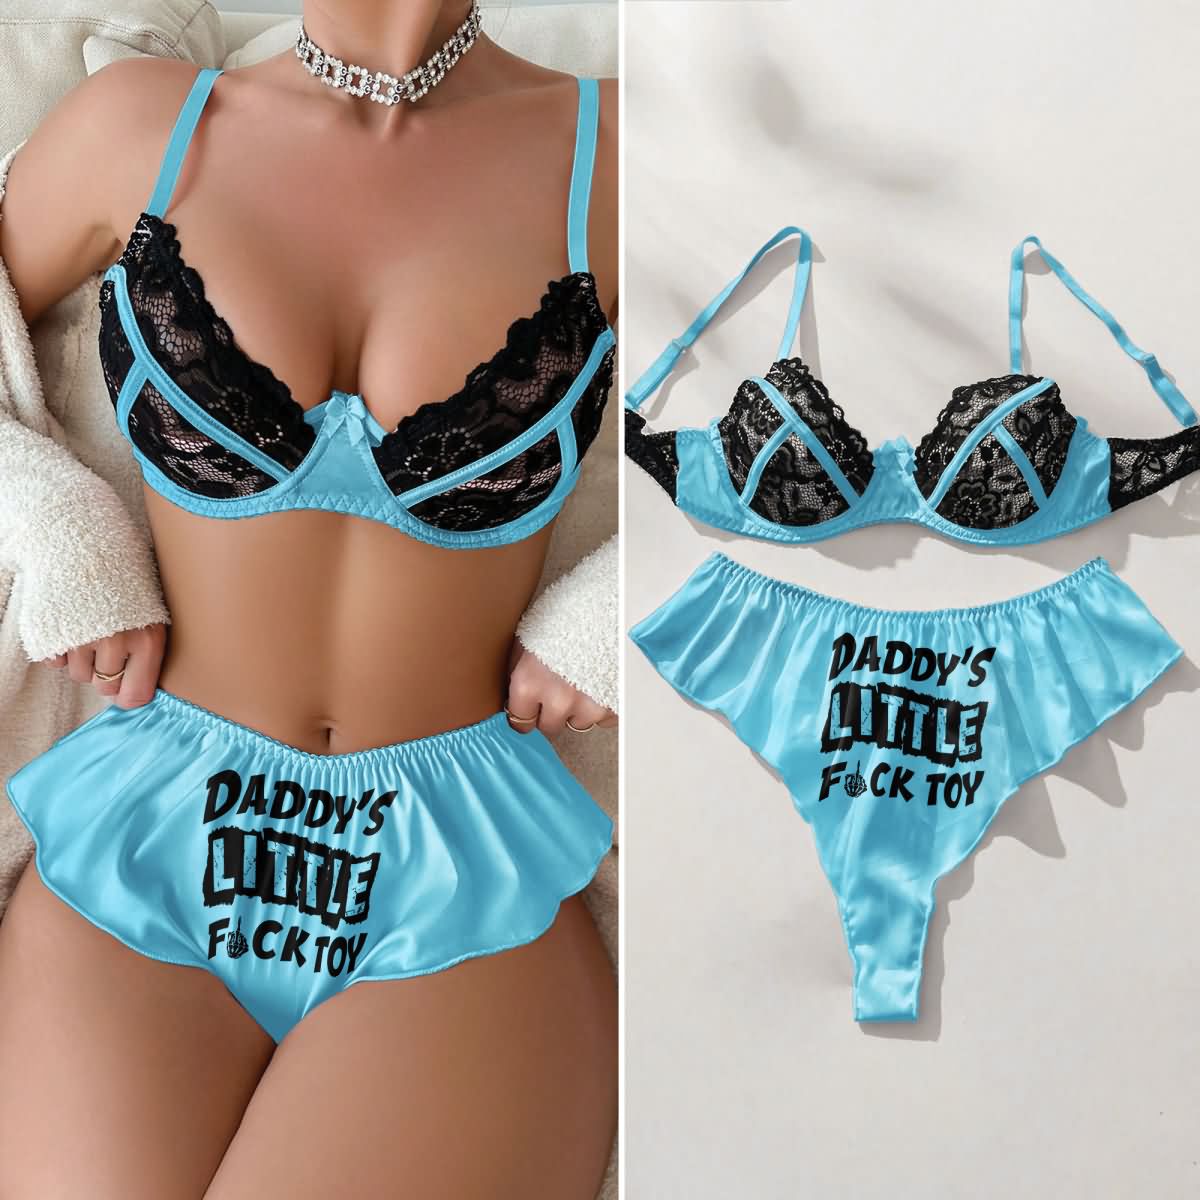 Contrast Lace Bra and Panty Set, Short Matching Underwear Sets, Naughty  Printed Design Lingerie | Wonder Skull